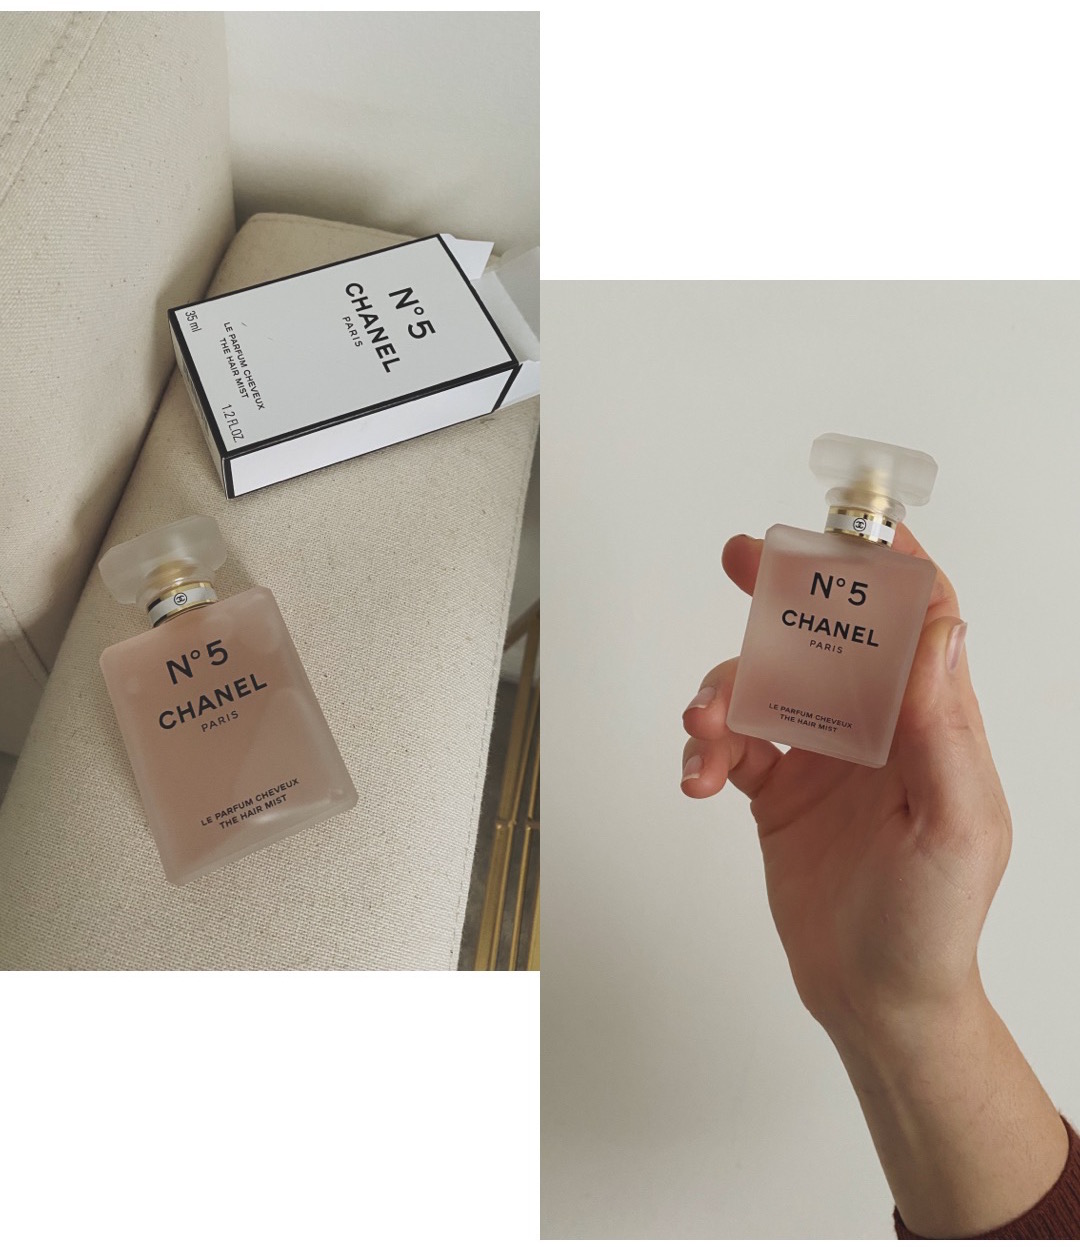 Chanel no 5 hair mist review